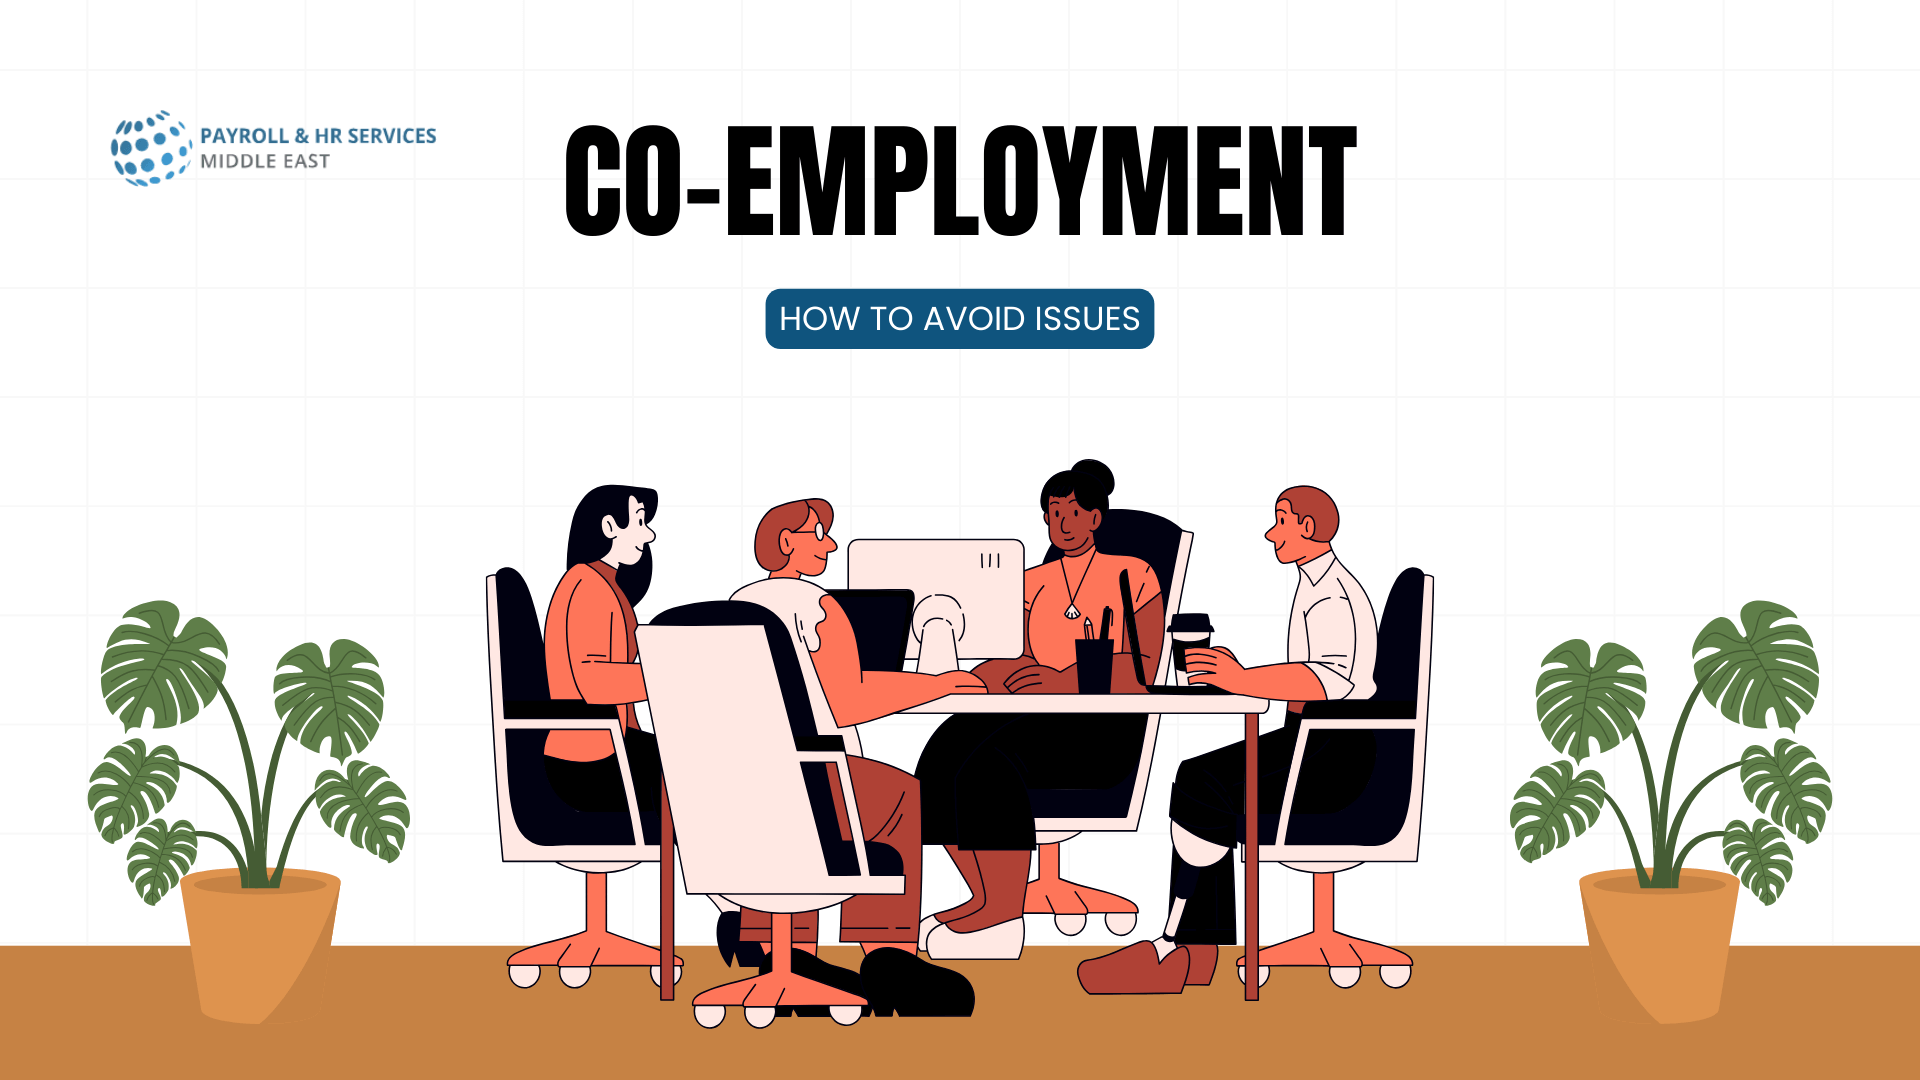 How to Avoid Co-employment Issues